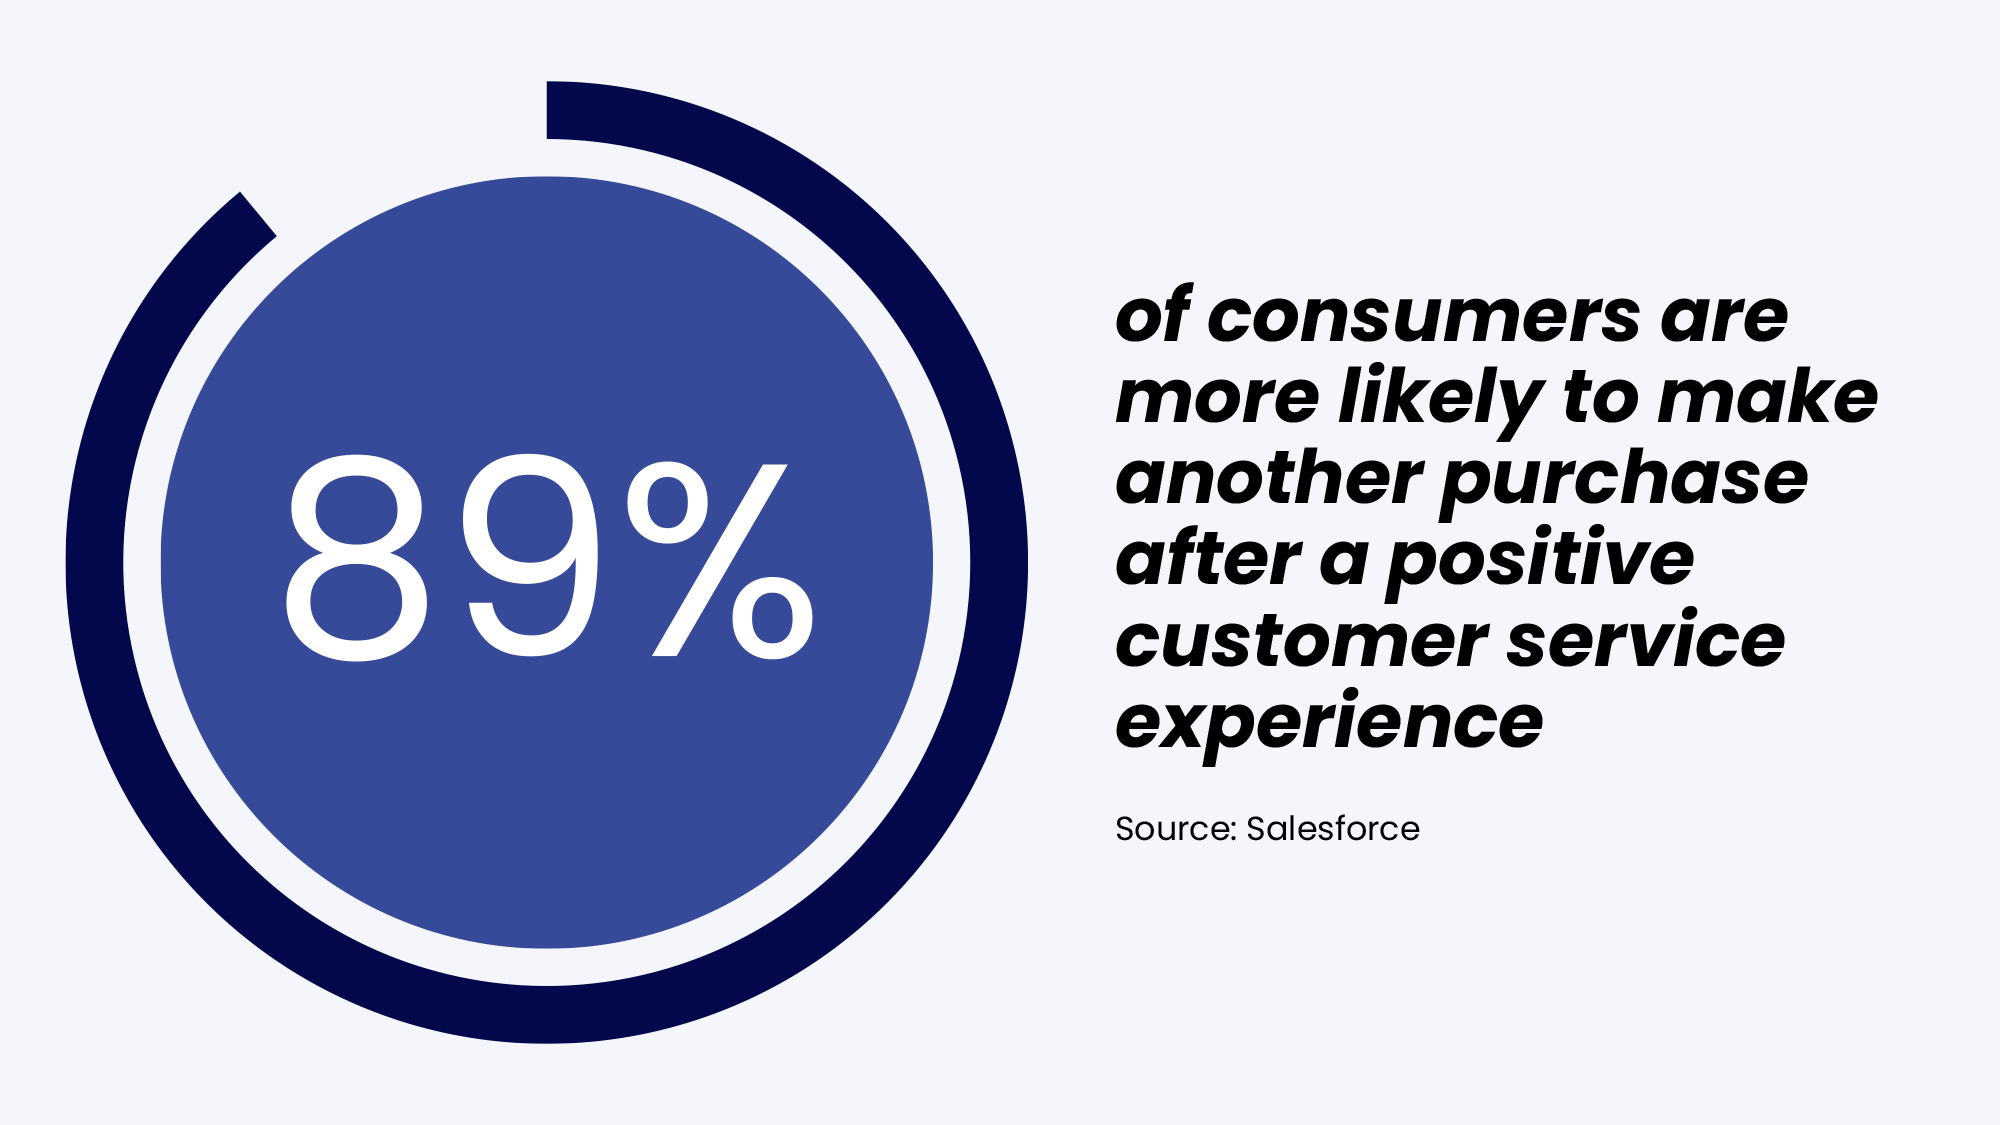 89% of consumers are more likely to make another purchase after a positive customer service experience